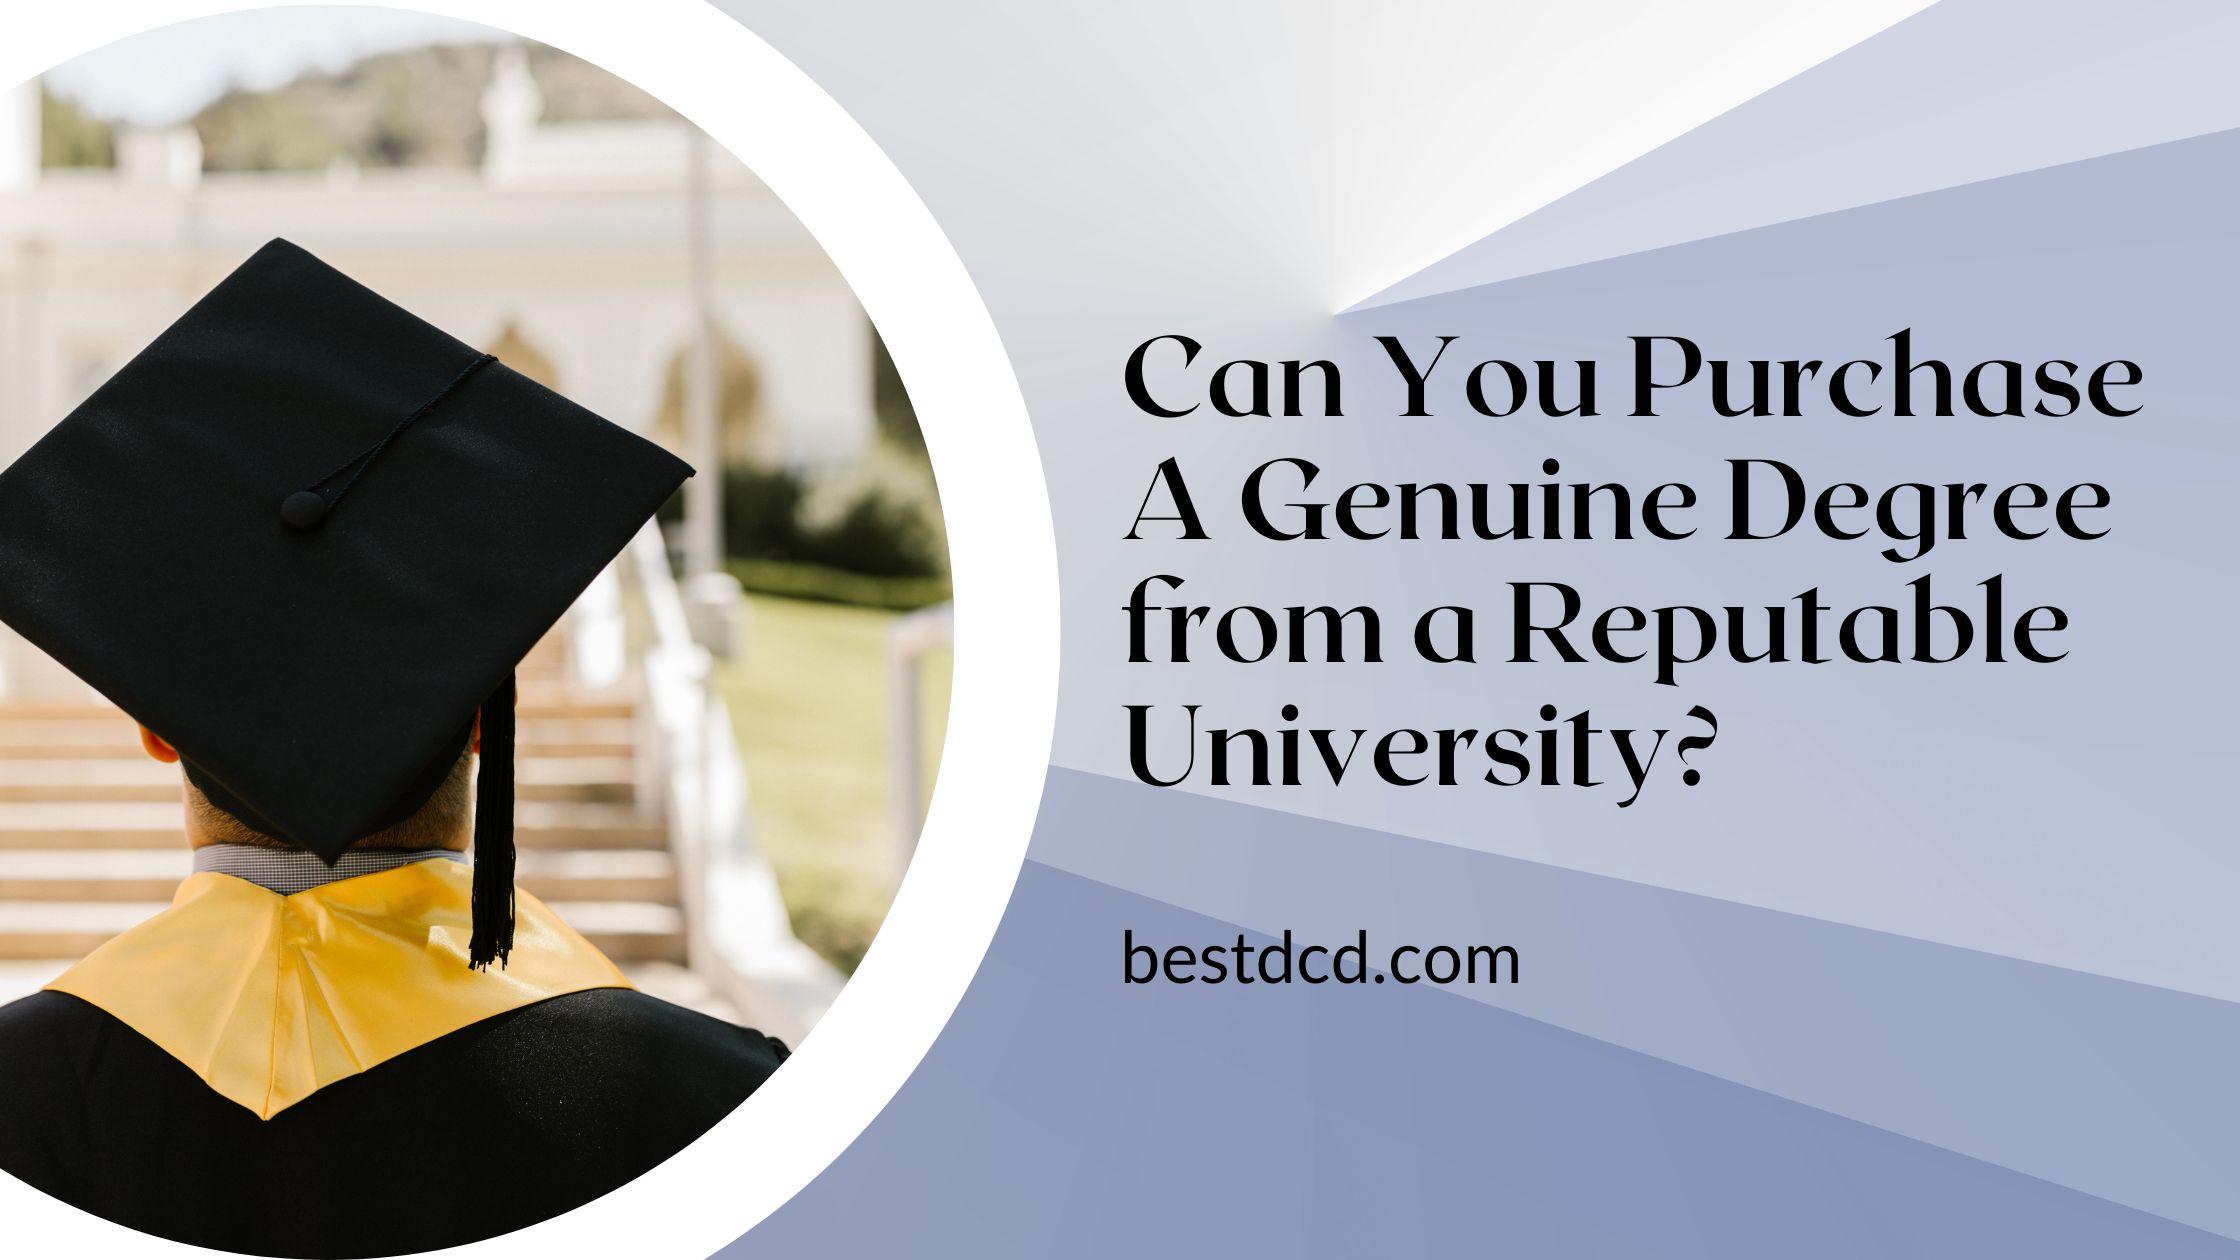 Can You Purchase A Genuine Degree from a Reputable University